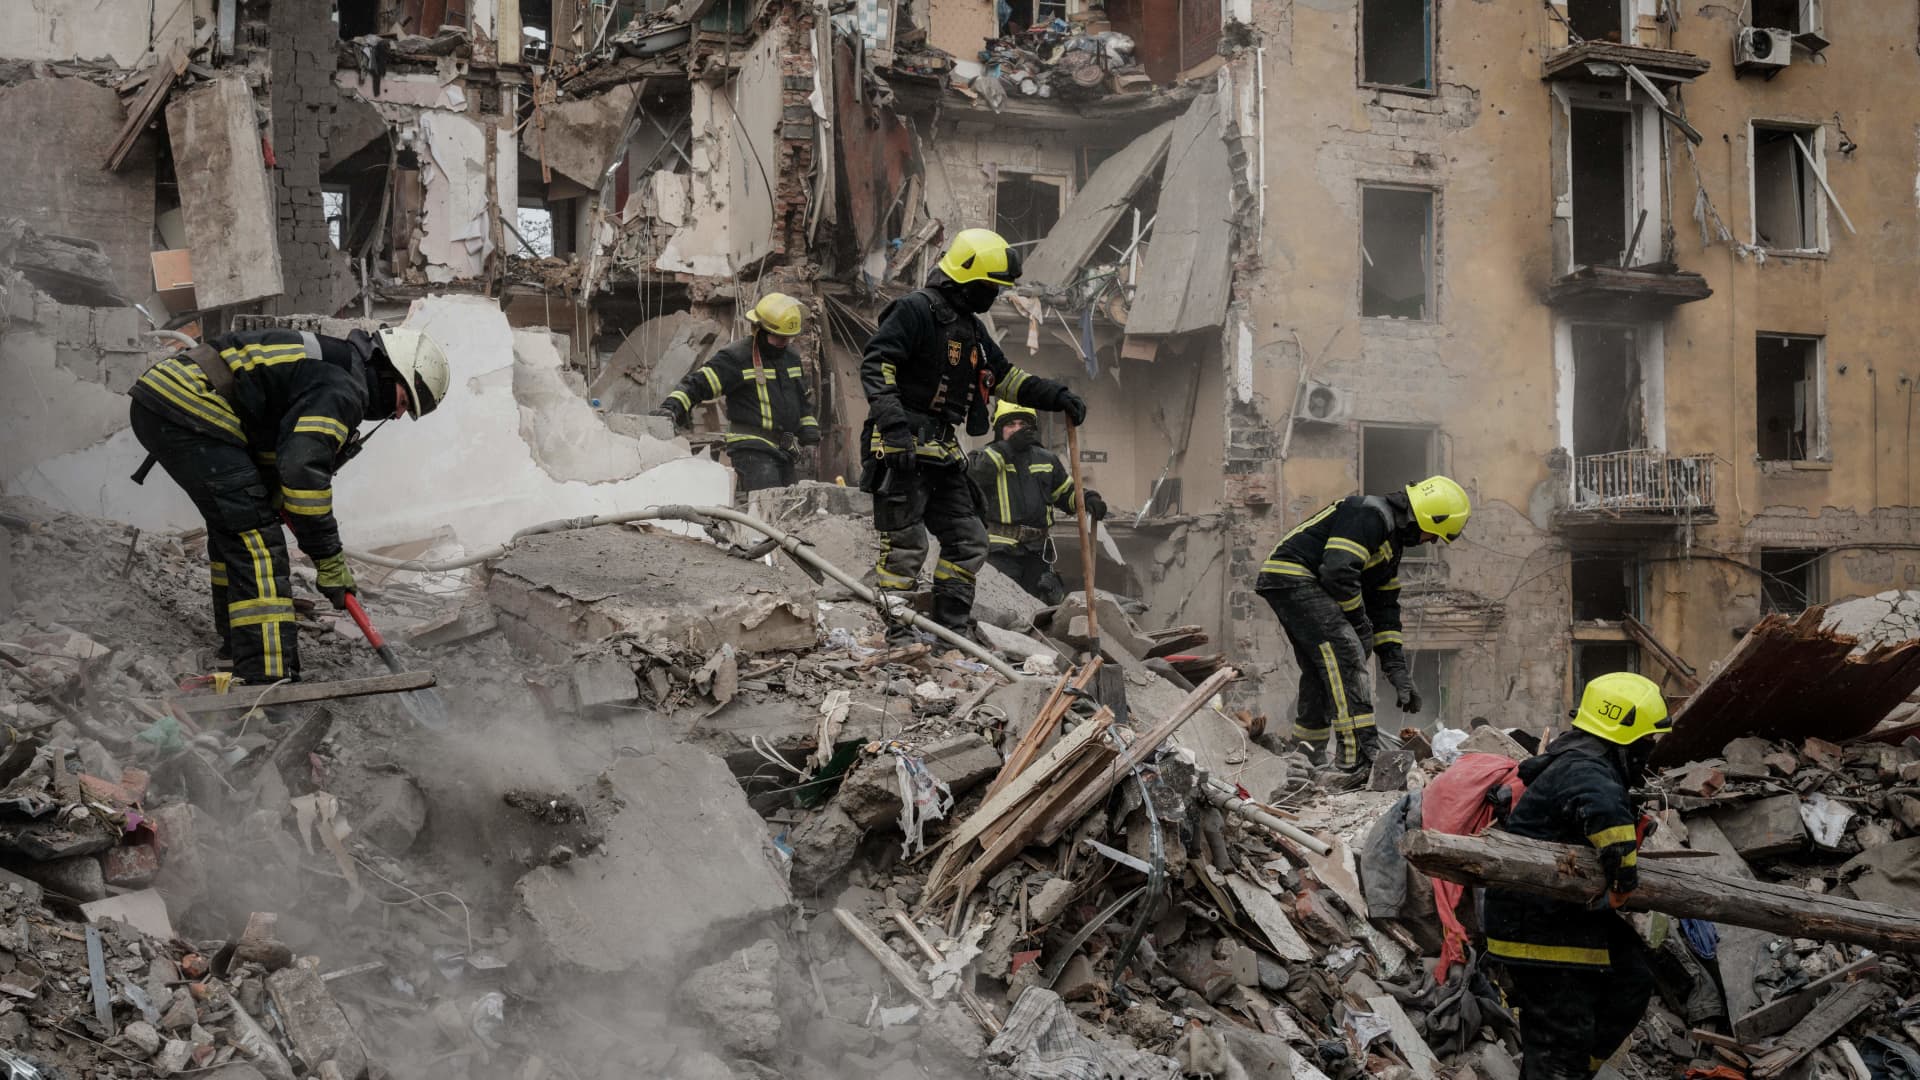 Firefighters work among debris of a building destroyed by a rocket strike in Kramatorsk on February 2, 2023, amid the Russian invasion of Ukraine.